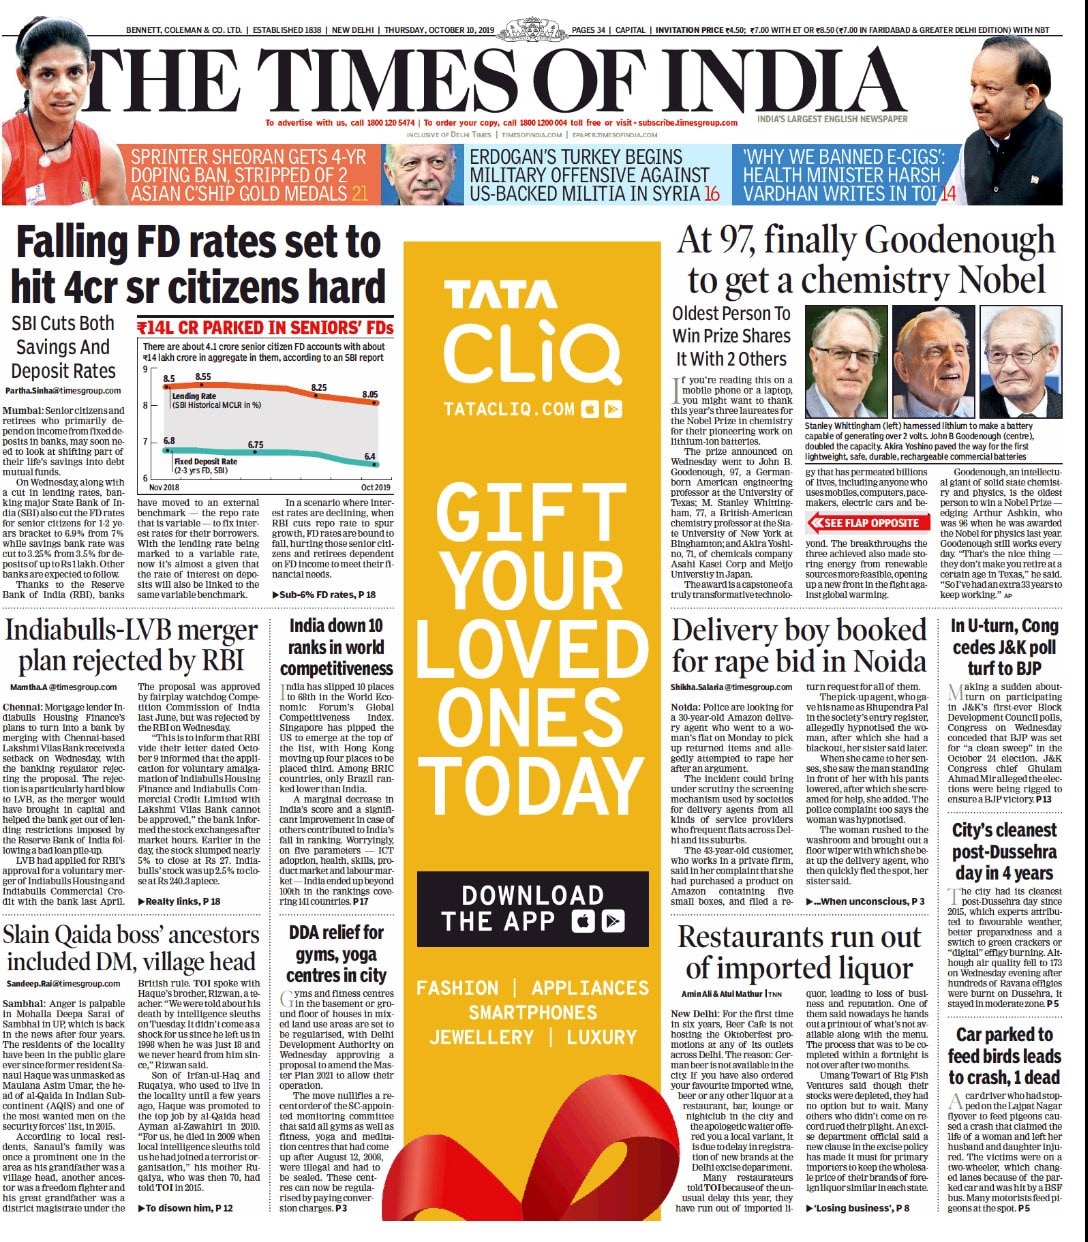 Newspaper Headlines: PM Modi, Xi Jinping To Meet In Chennai This Week And Other Big Stories